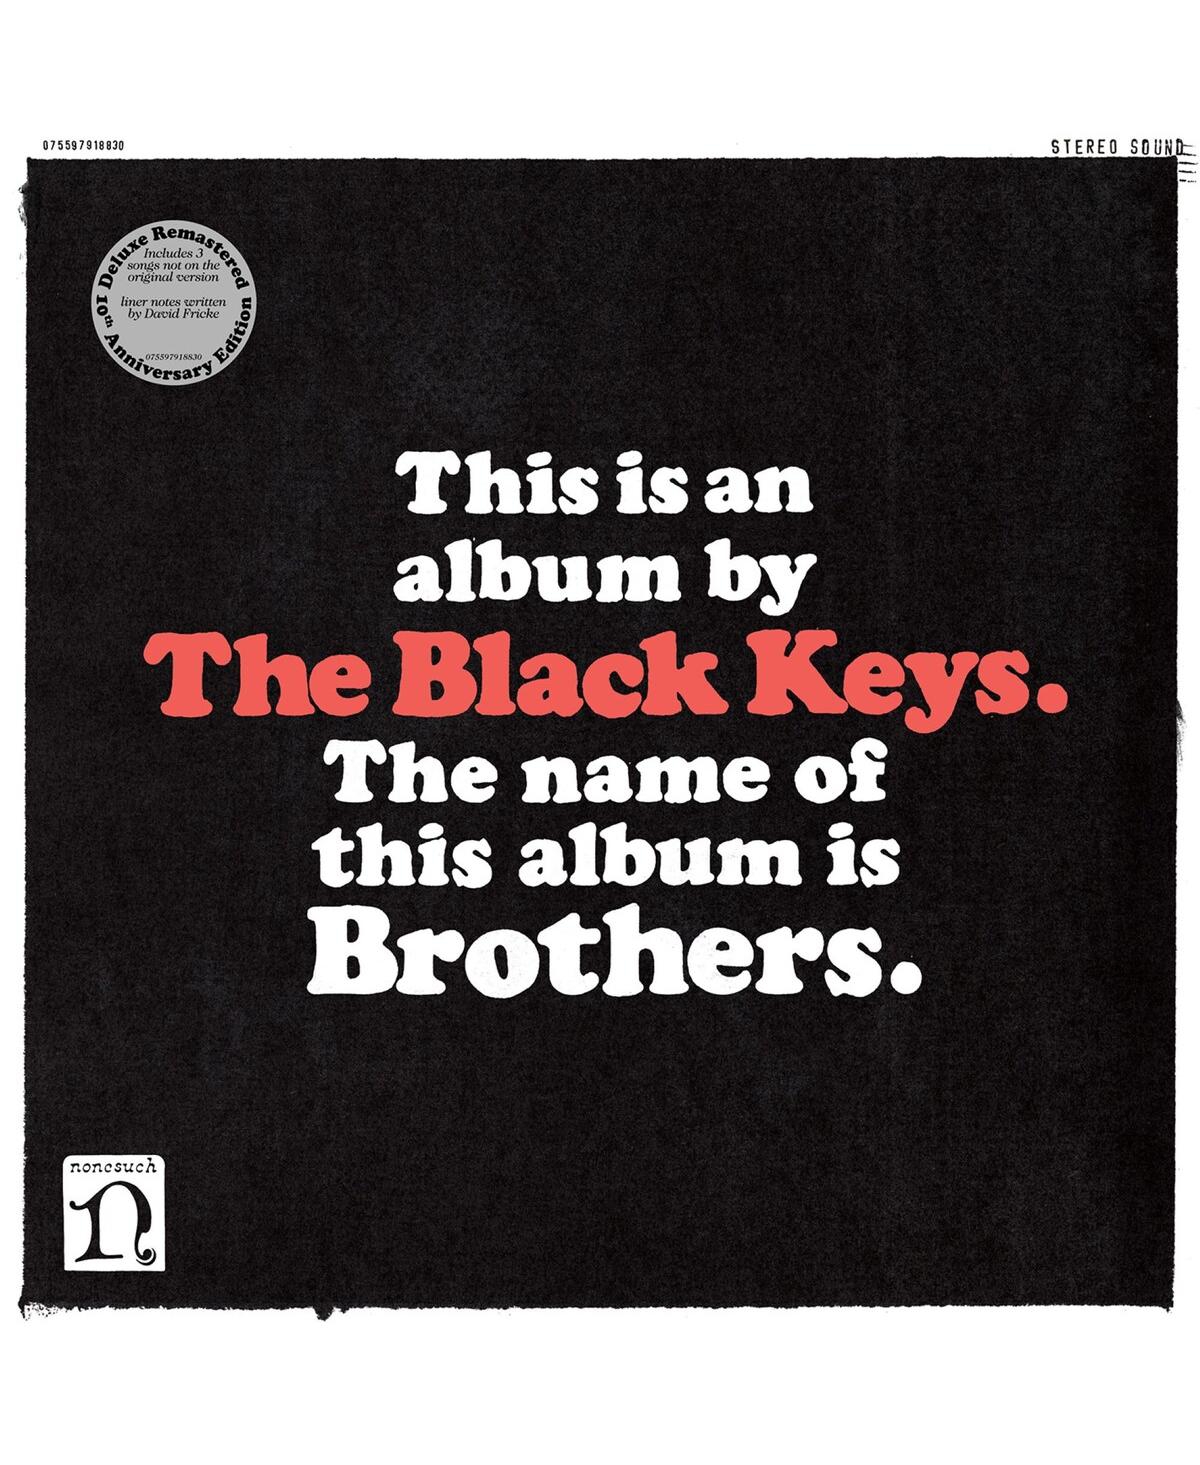 The Black Keys - Brothers Deluxe Remastered 10th Anniversary Edition Vinyl 2LP